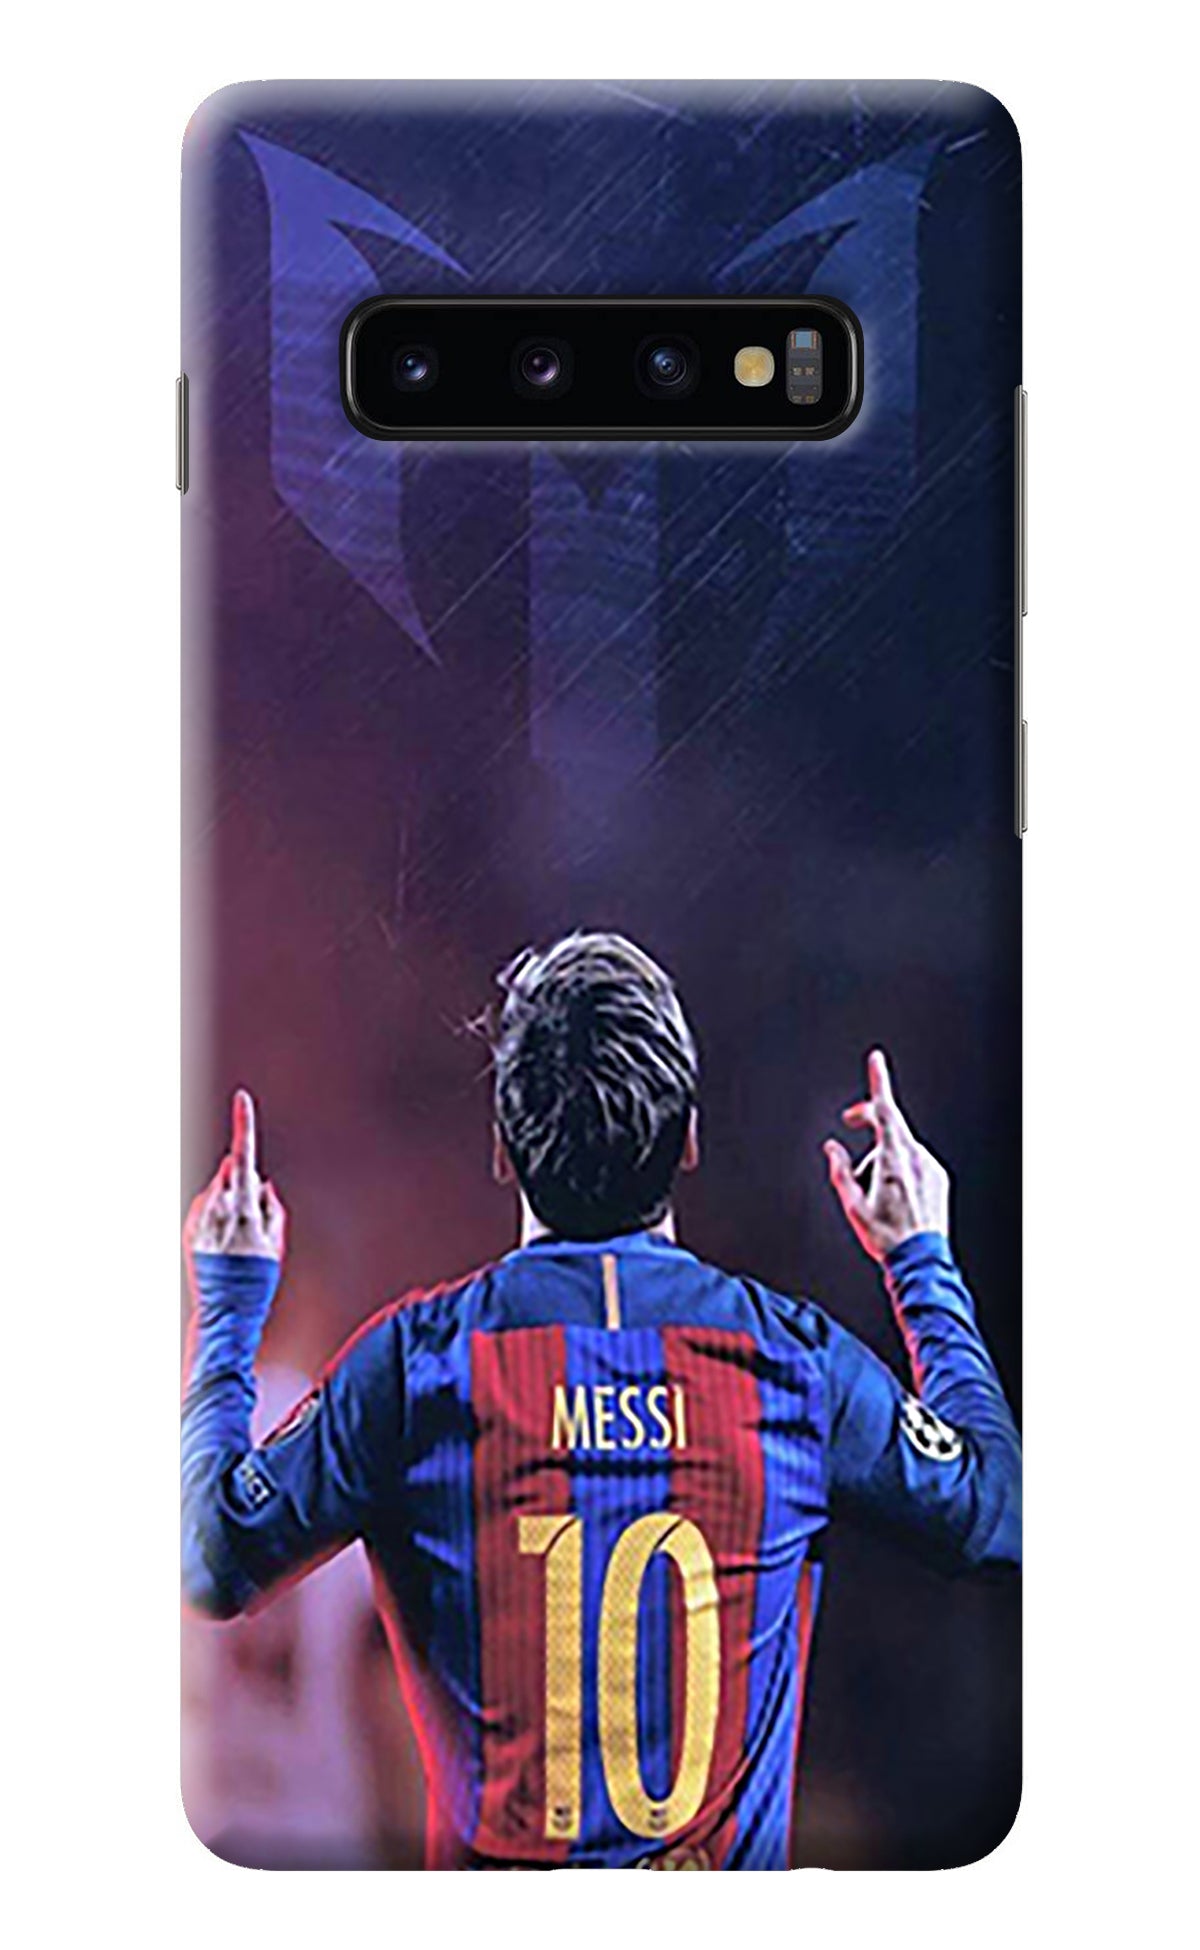 Messi Samsung S10 Plus Back Cover